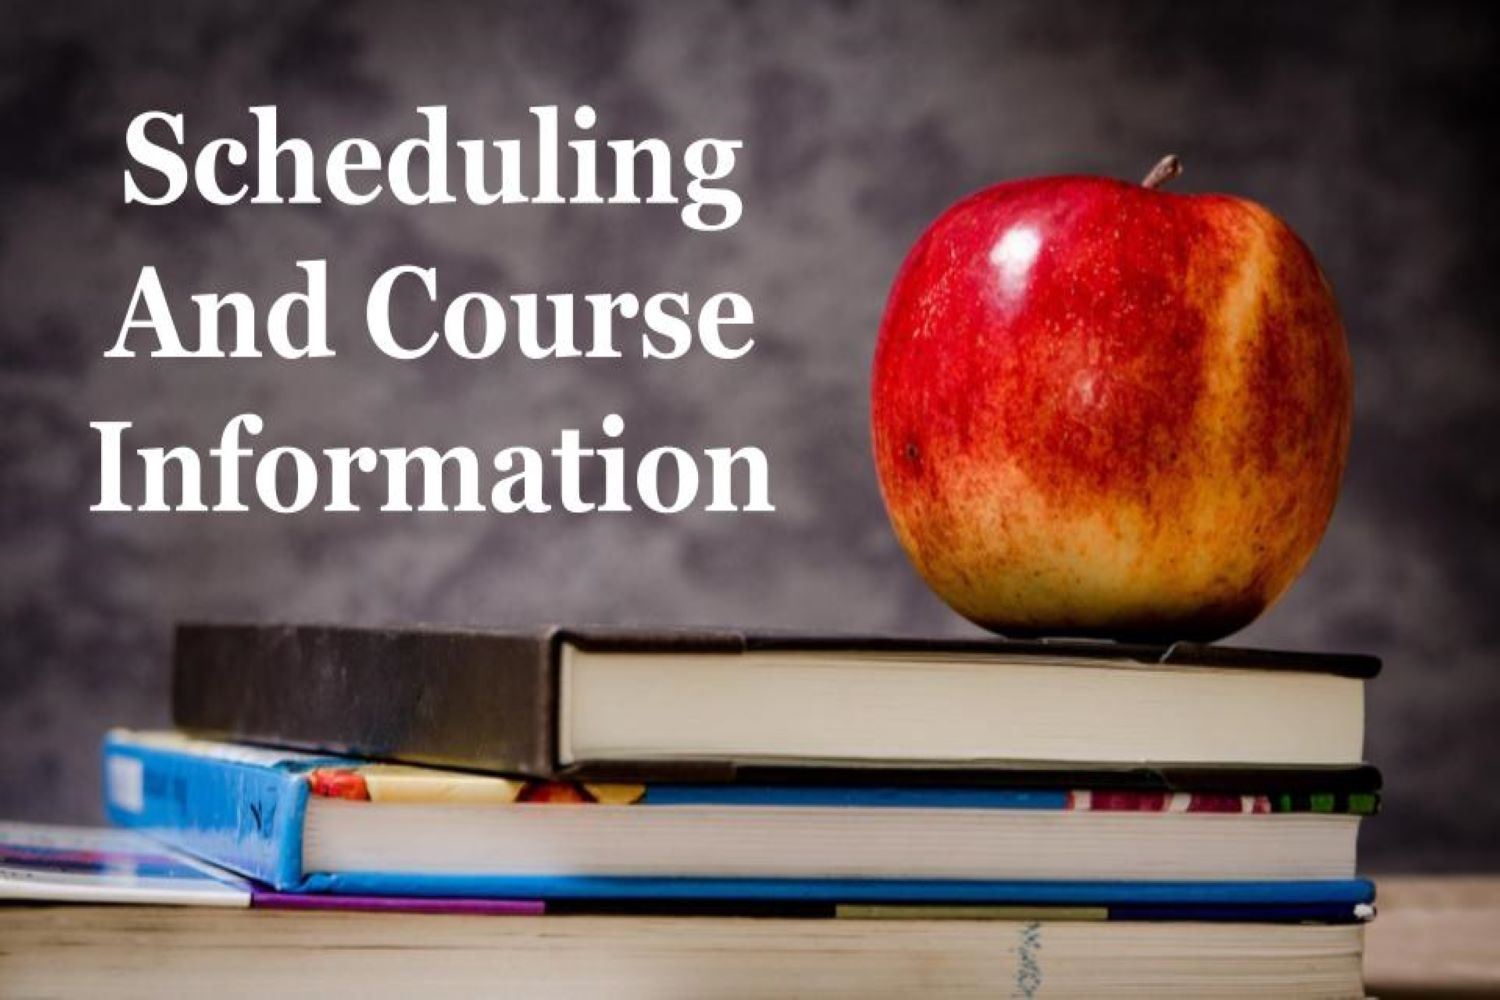  Scheduling and Course Information